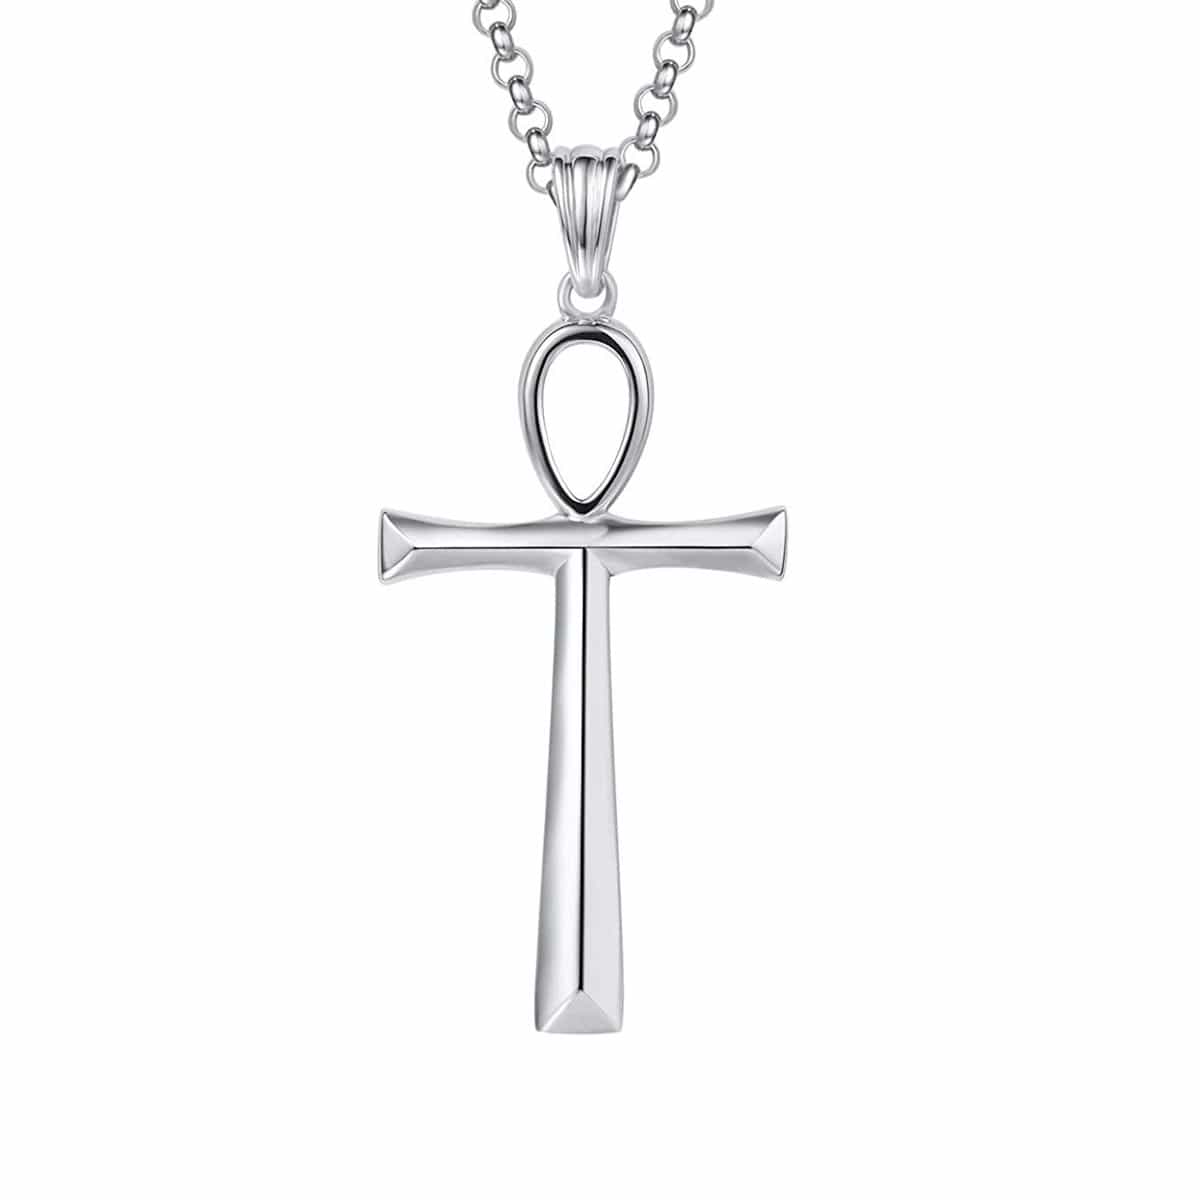 Fancime Polished Ankh Cross Pendant Sterling Silver Necklace 20 Inches